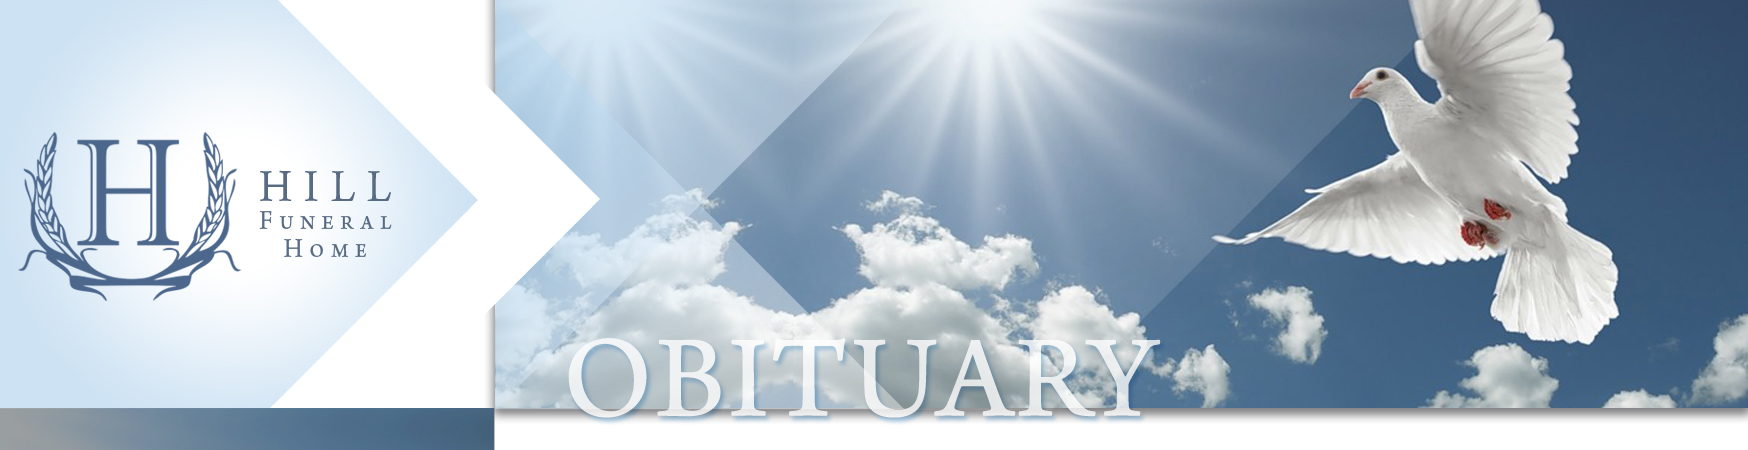 Patricia Beeman Obituary - Hill Funeral Home